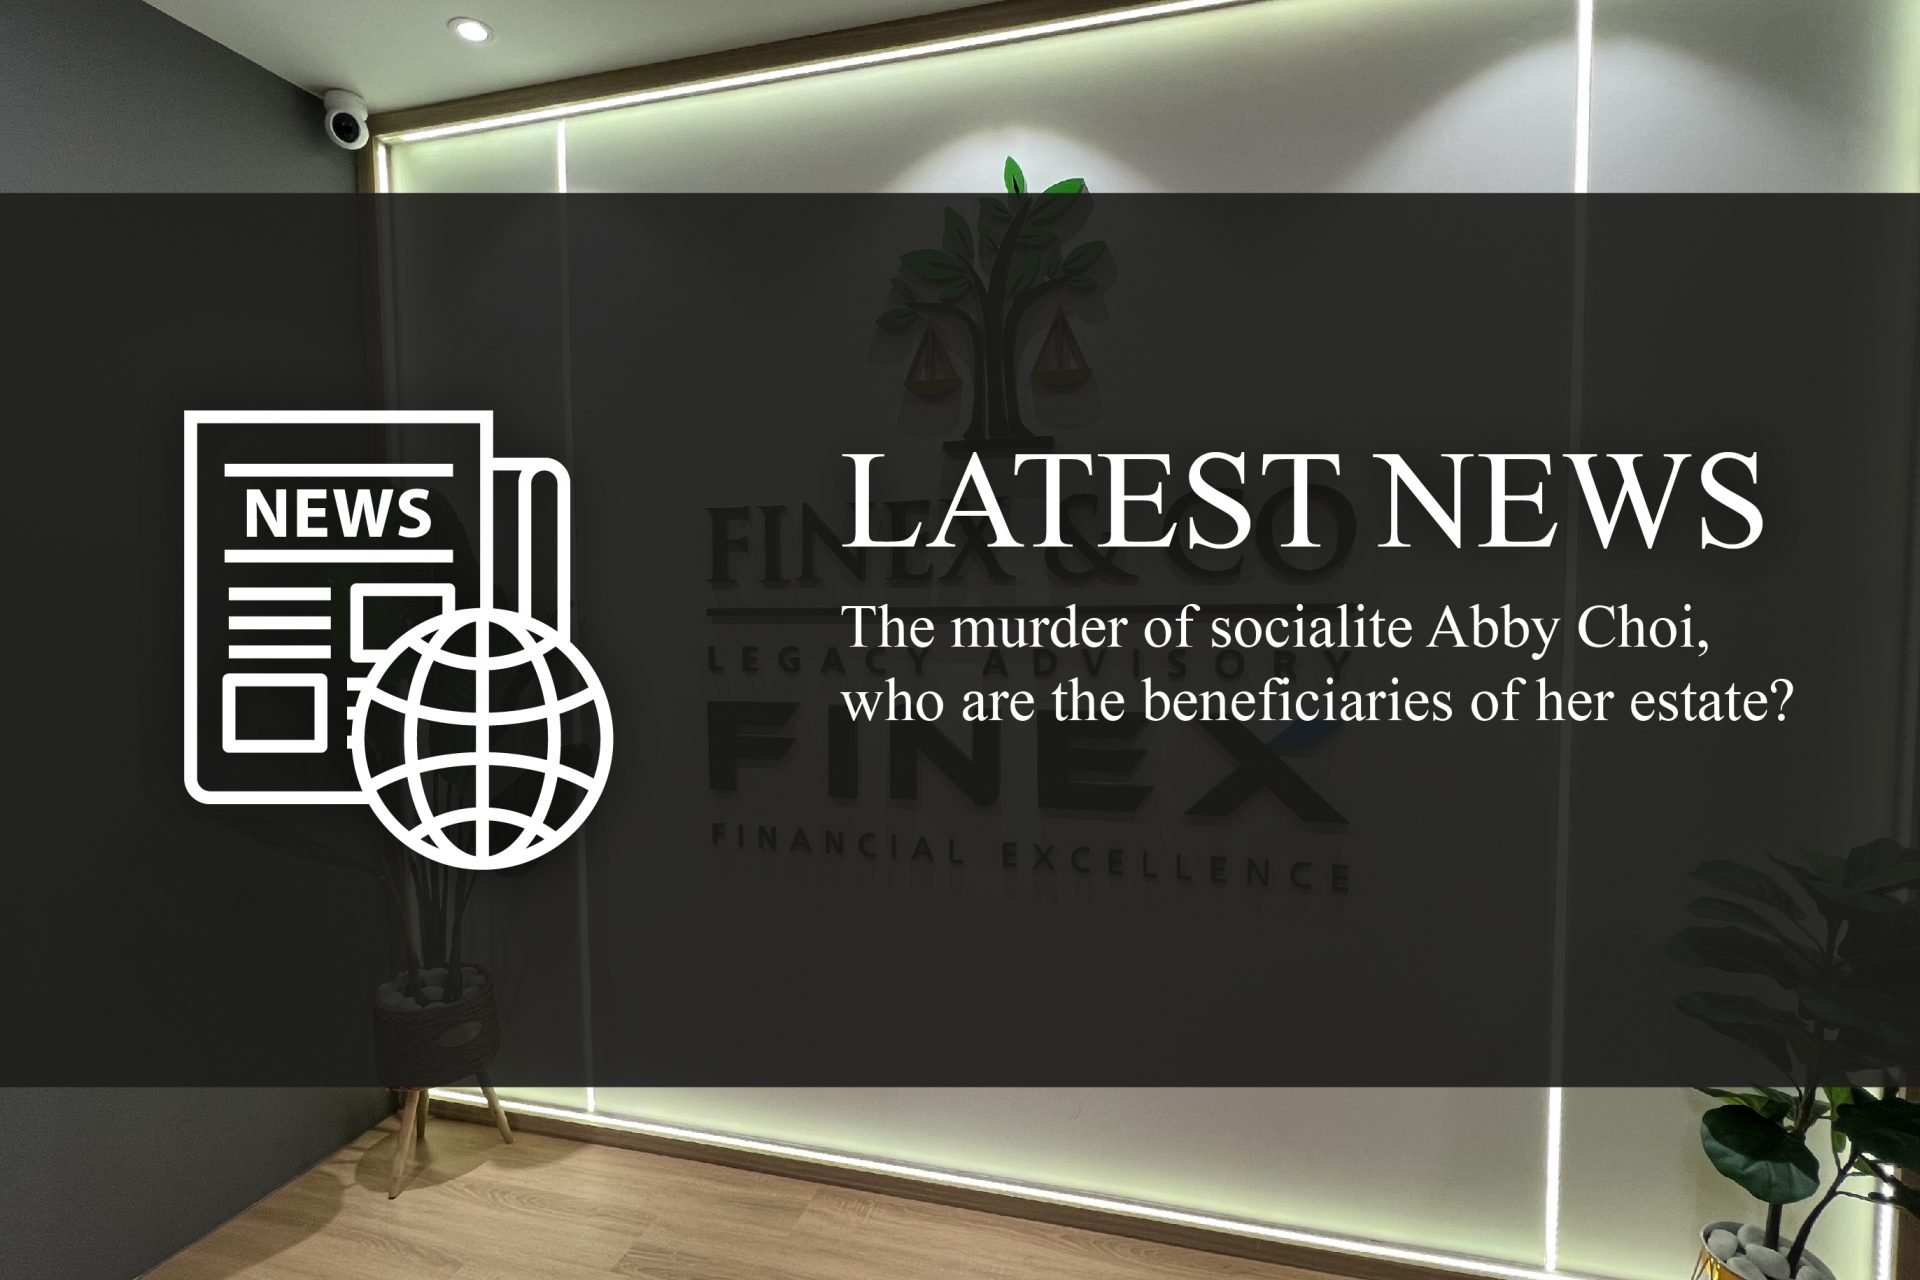 The murder of socialite Abby Choi and who are the beneficiaries to her estate?